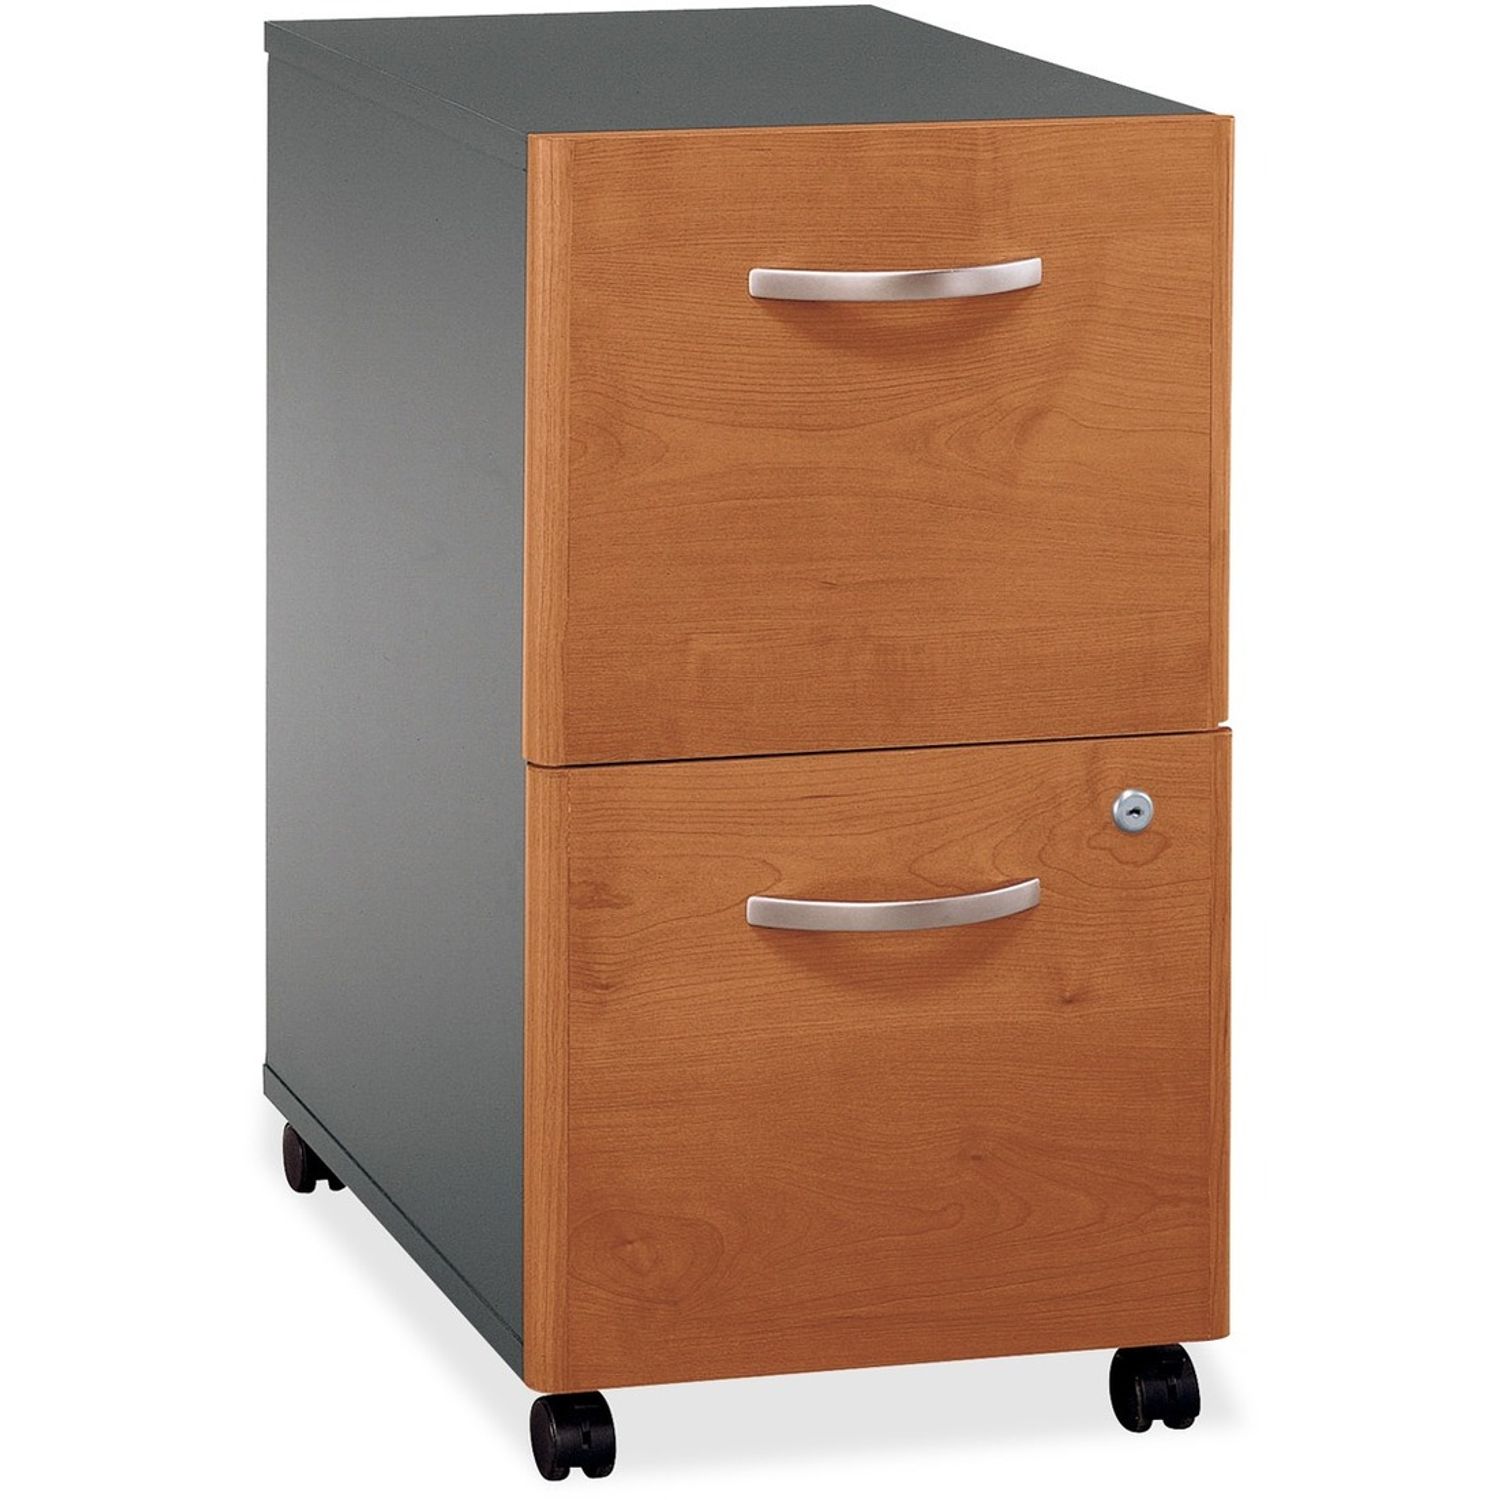 Series C2 Drawer Mobile Pedestal - Assembled in Natural Cherry 15.7" x 20.3" x 28.1" x 1", 2, Material: Melamine, Pressboard, Finish: Natural Cherry